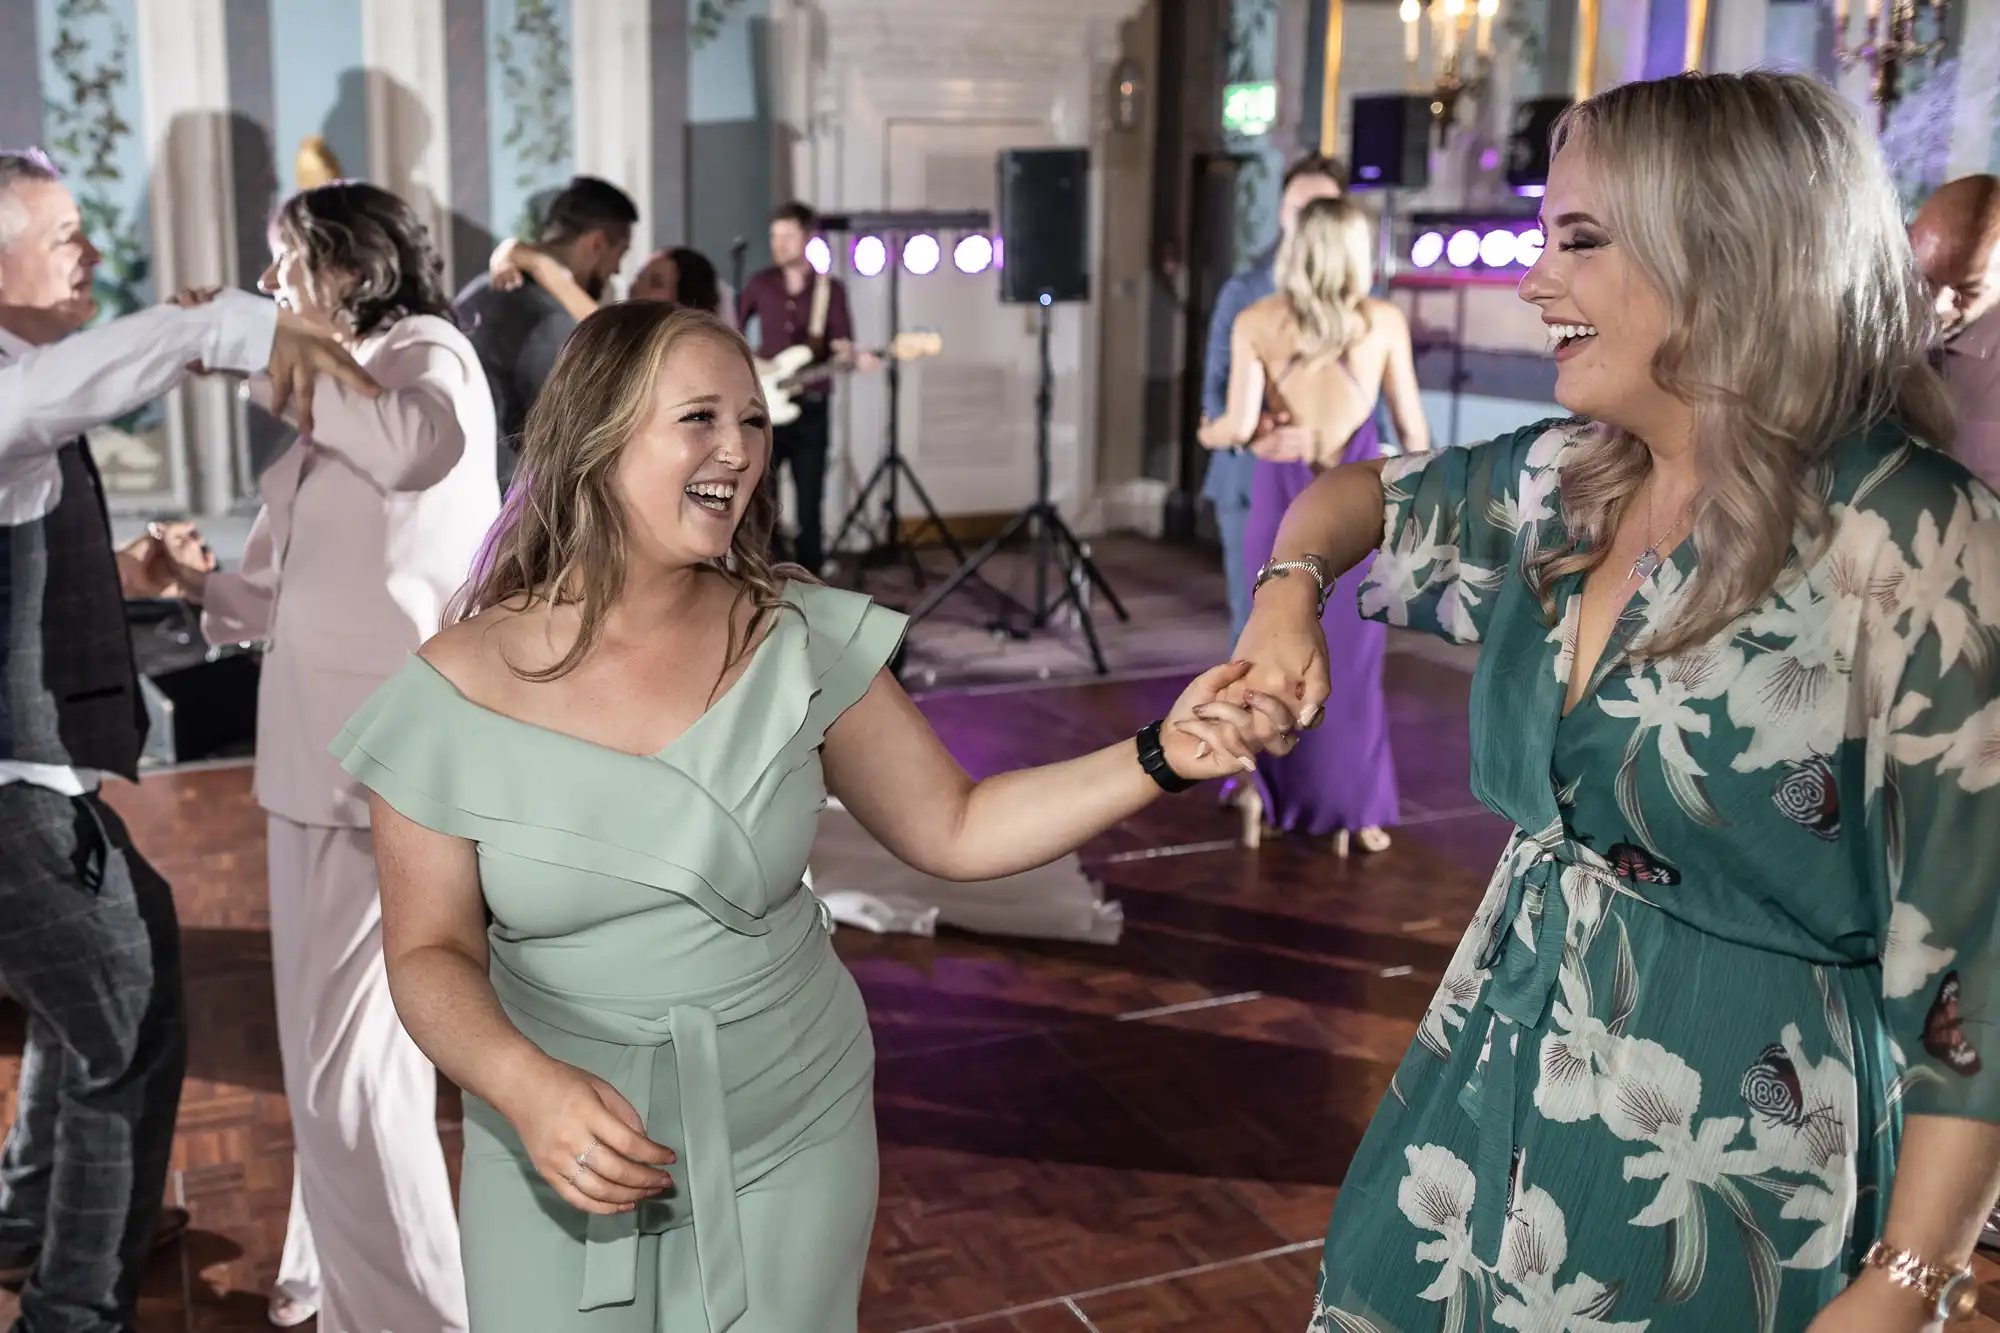 Two women joyfully dancing and holding hands at a lively indoor wedding reception, with other guests dancing and a live band in the background.